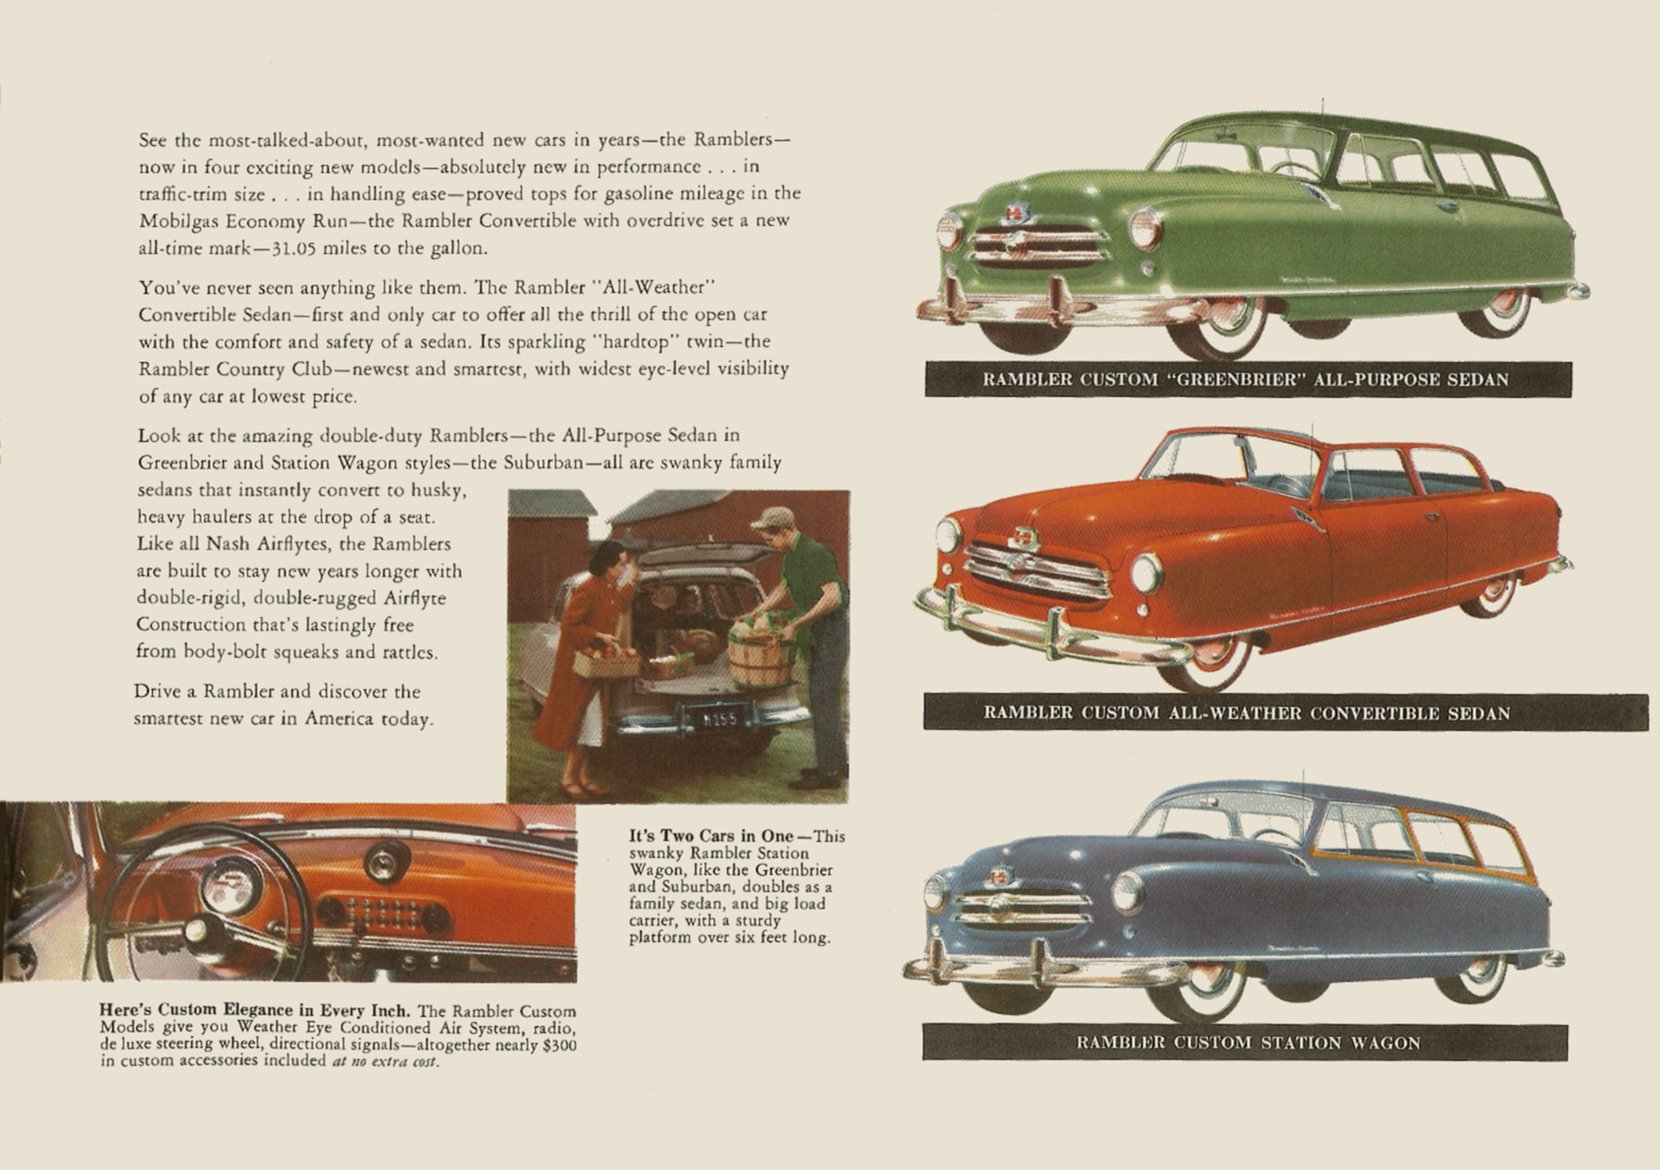 1951 Nash Airflyte Brochure Page 5